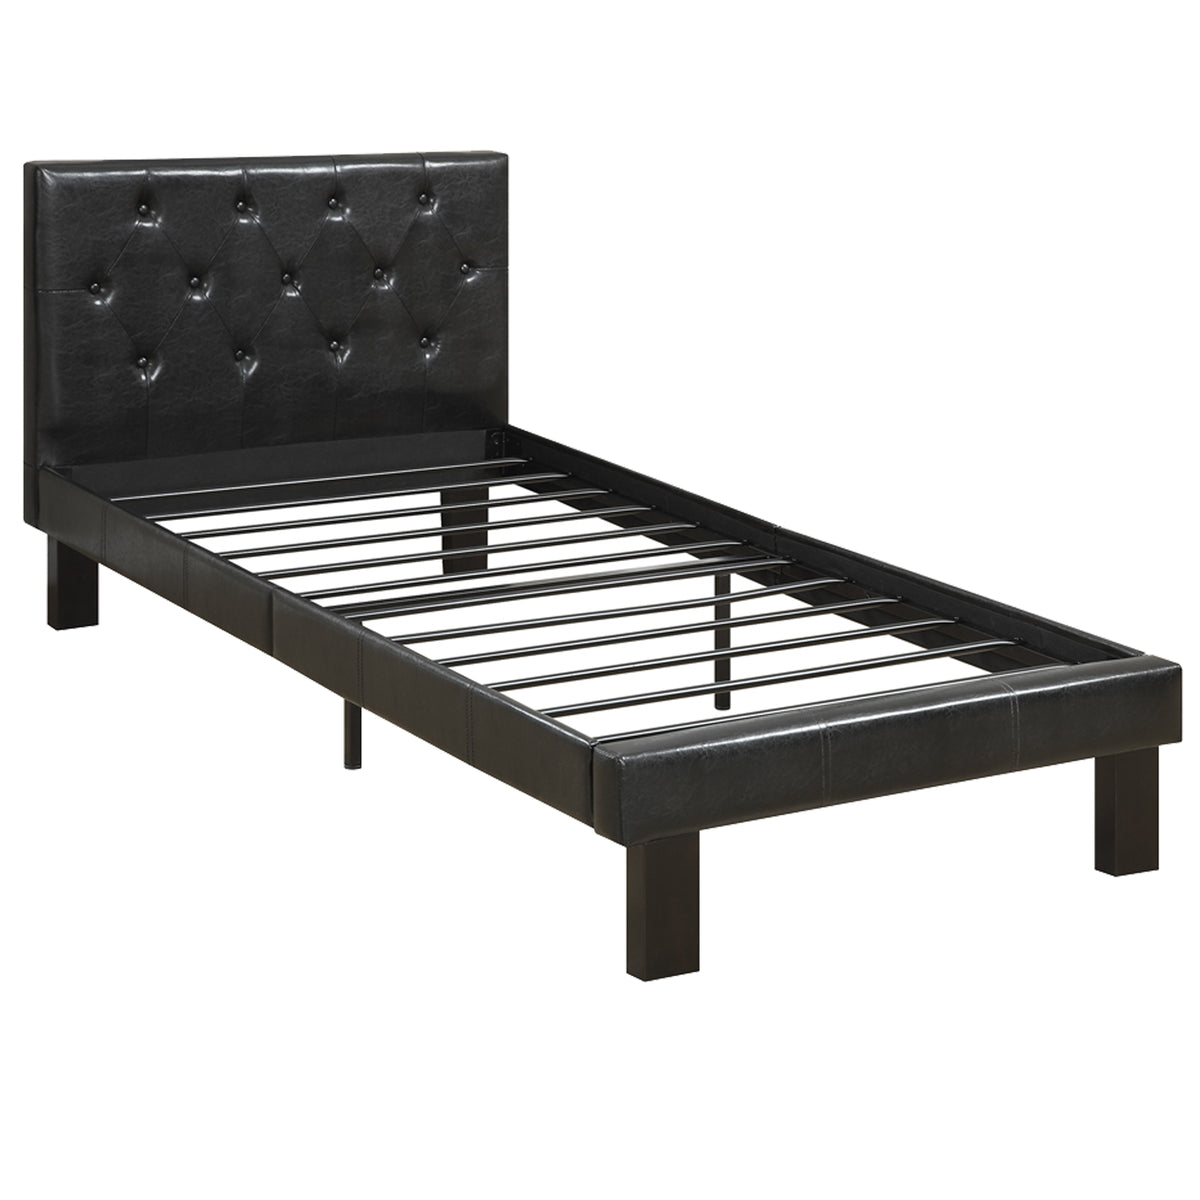 BM171746 Faux Leather Upholstered Full size Bed With tufted Headboard, Black